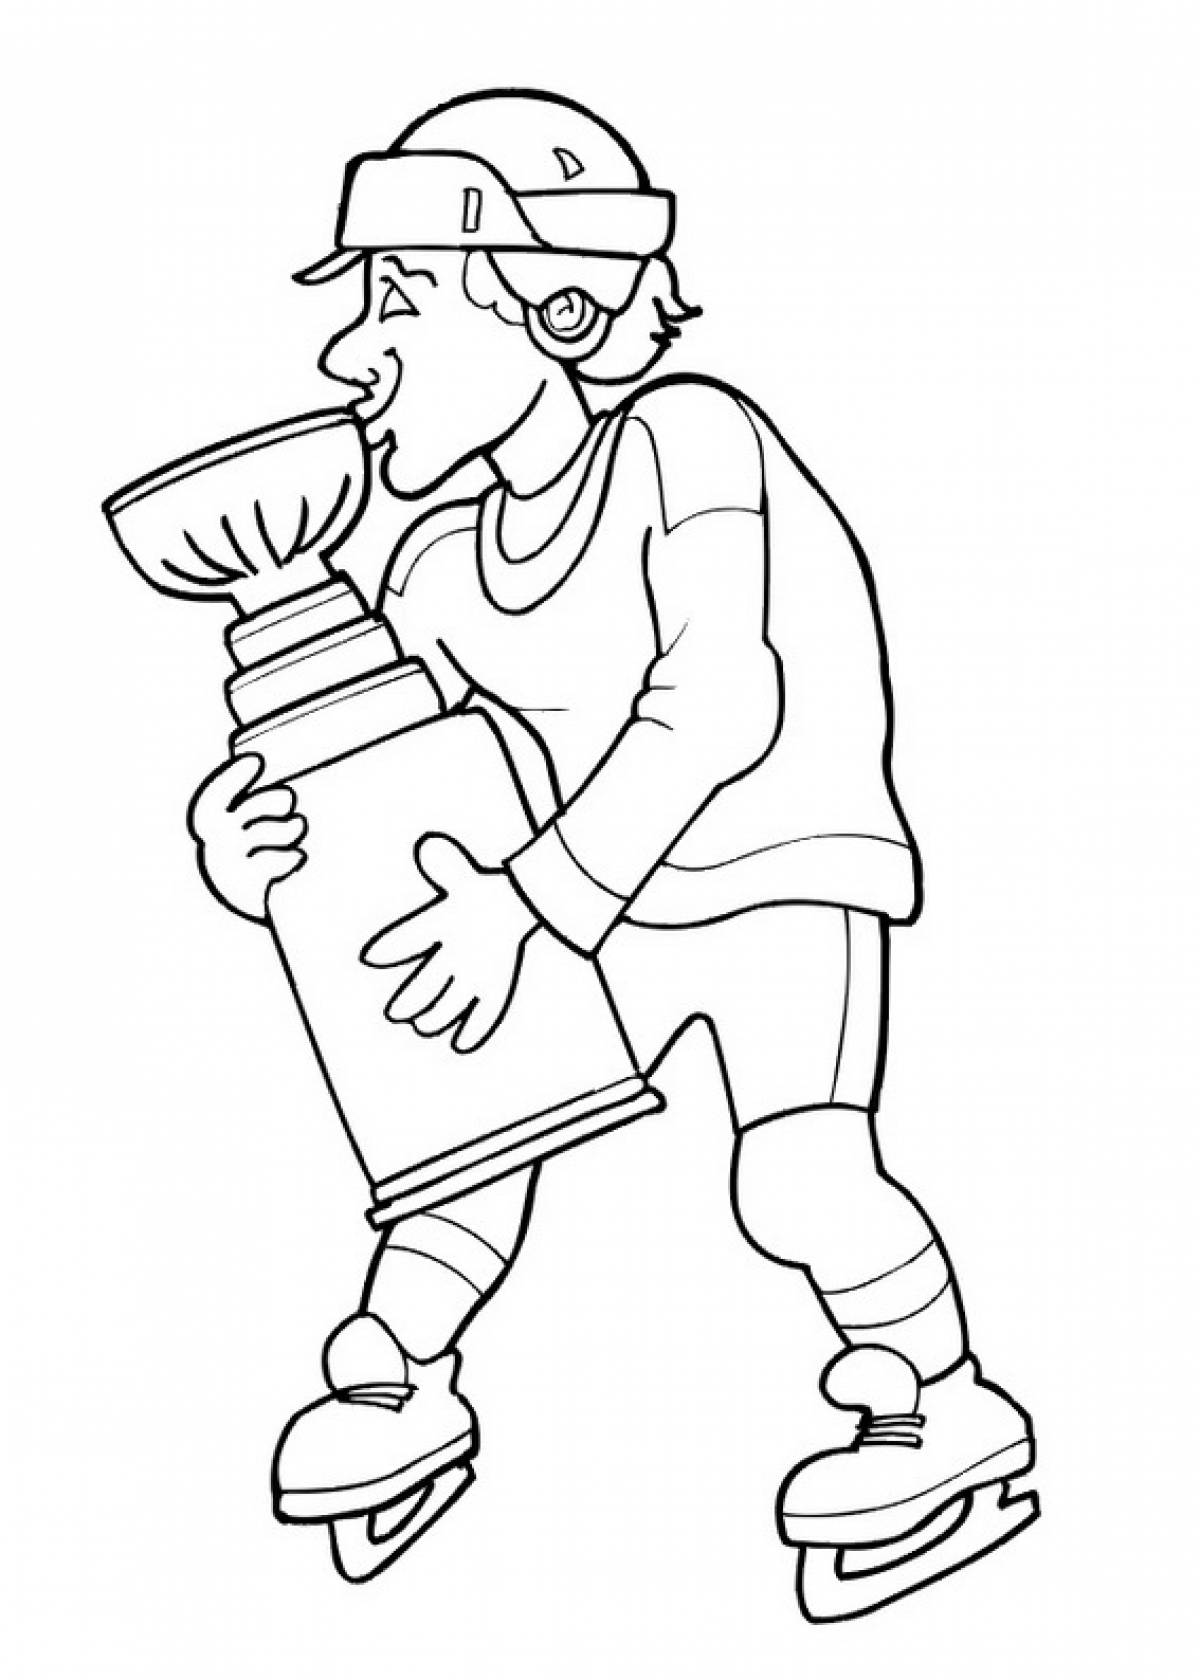 Hockey player with cup